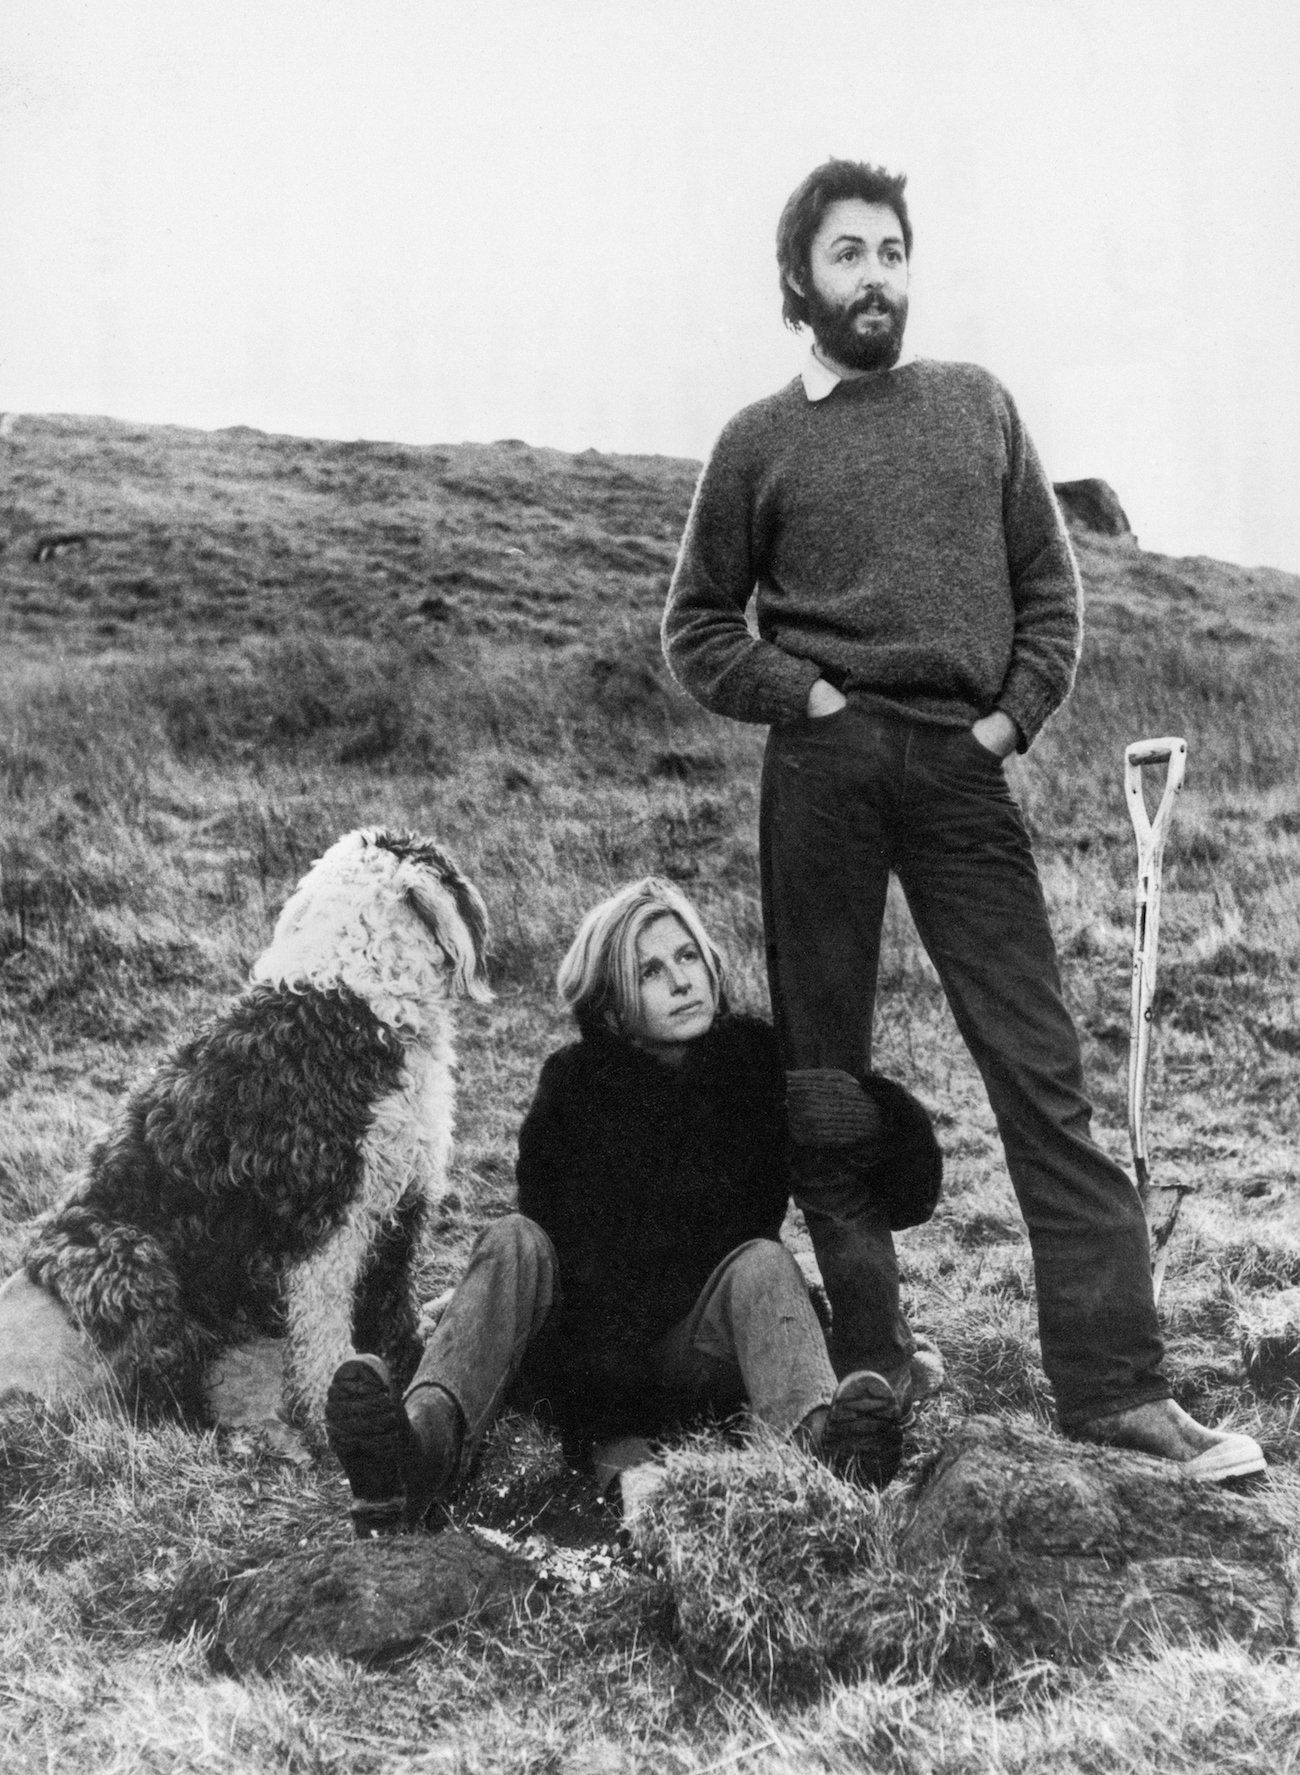 Paul McCartney and his wife Linda at their farm near Campbeltown, 1971.